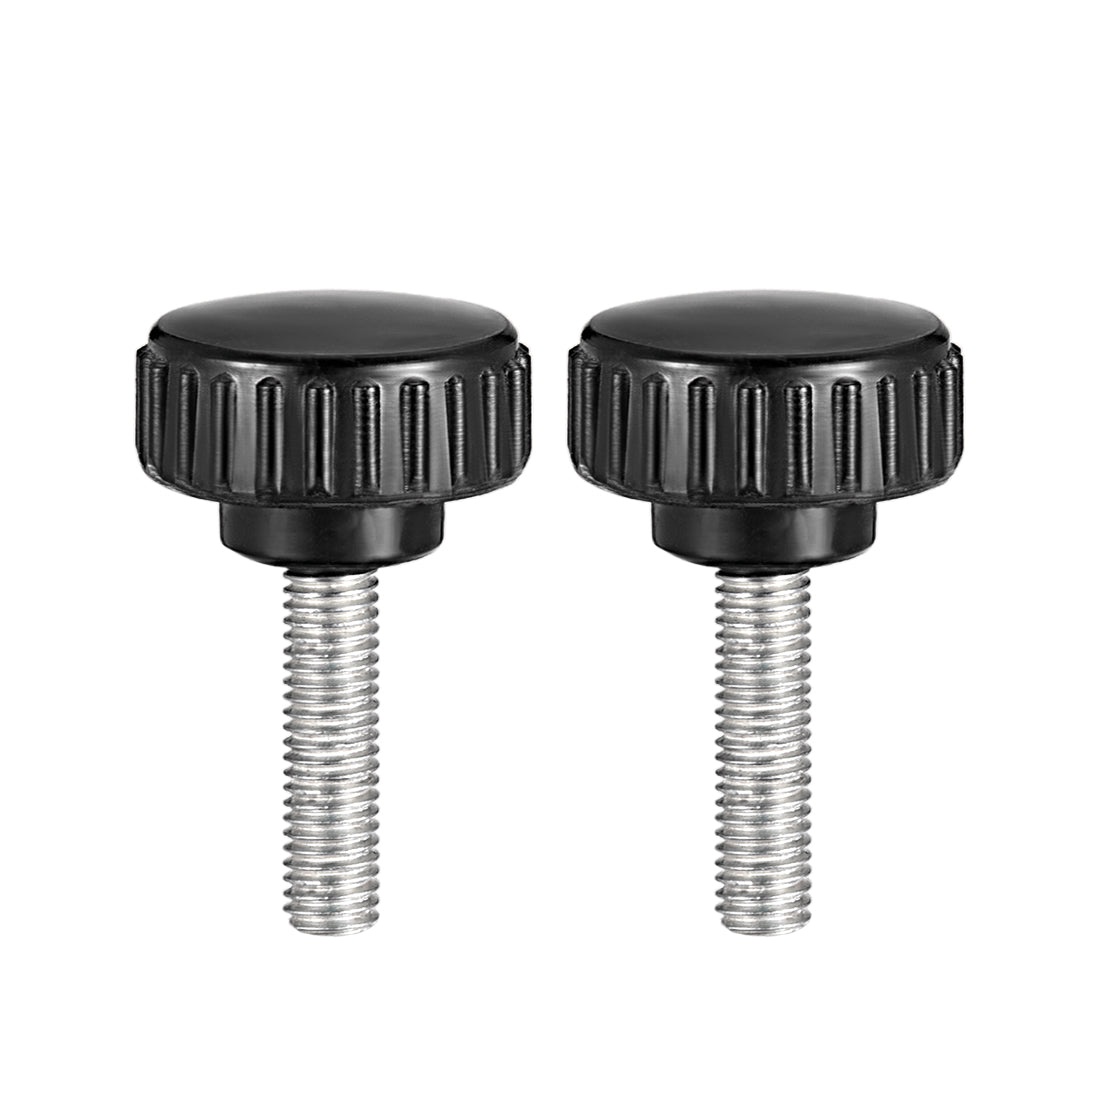 Uxcell Uxcell M5 x 30mm Male Thread Knurled Clamping Knobs Grip Thumb Screw on Type  2 Pcs